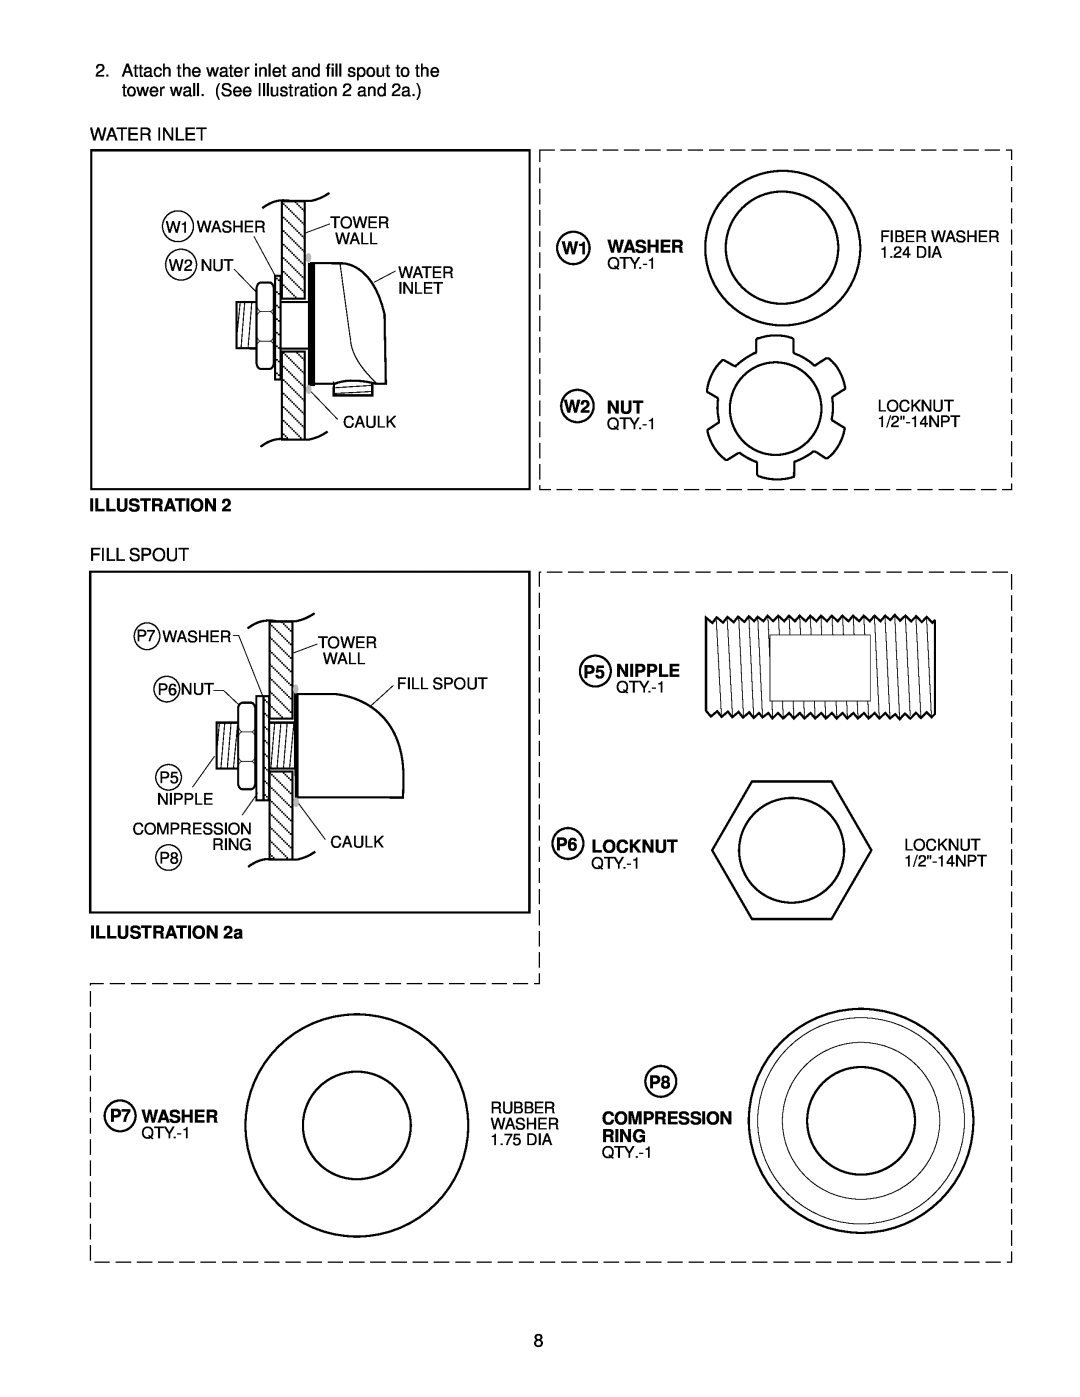 Jacuzzi J-SHOWER TOWERTM Water Inlet, W1 WASHER, W2 NUT, Illustration, Fill Spout, P5 NIPPLE, P6 LOCKNUT, P7 WASHER, Ring 